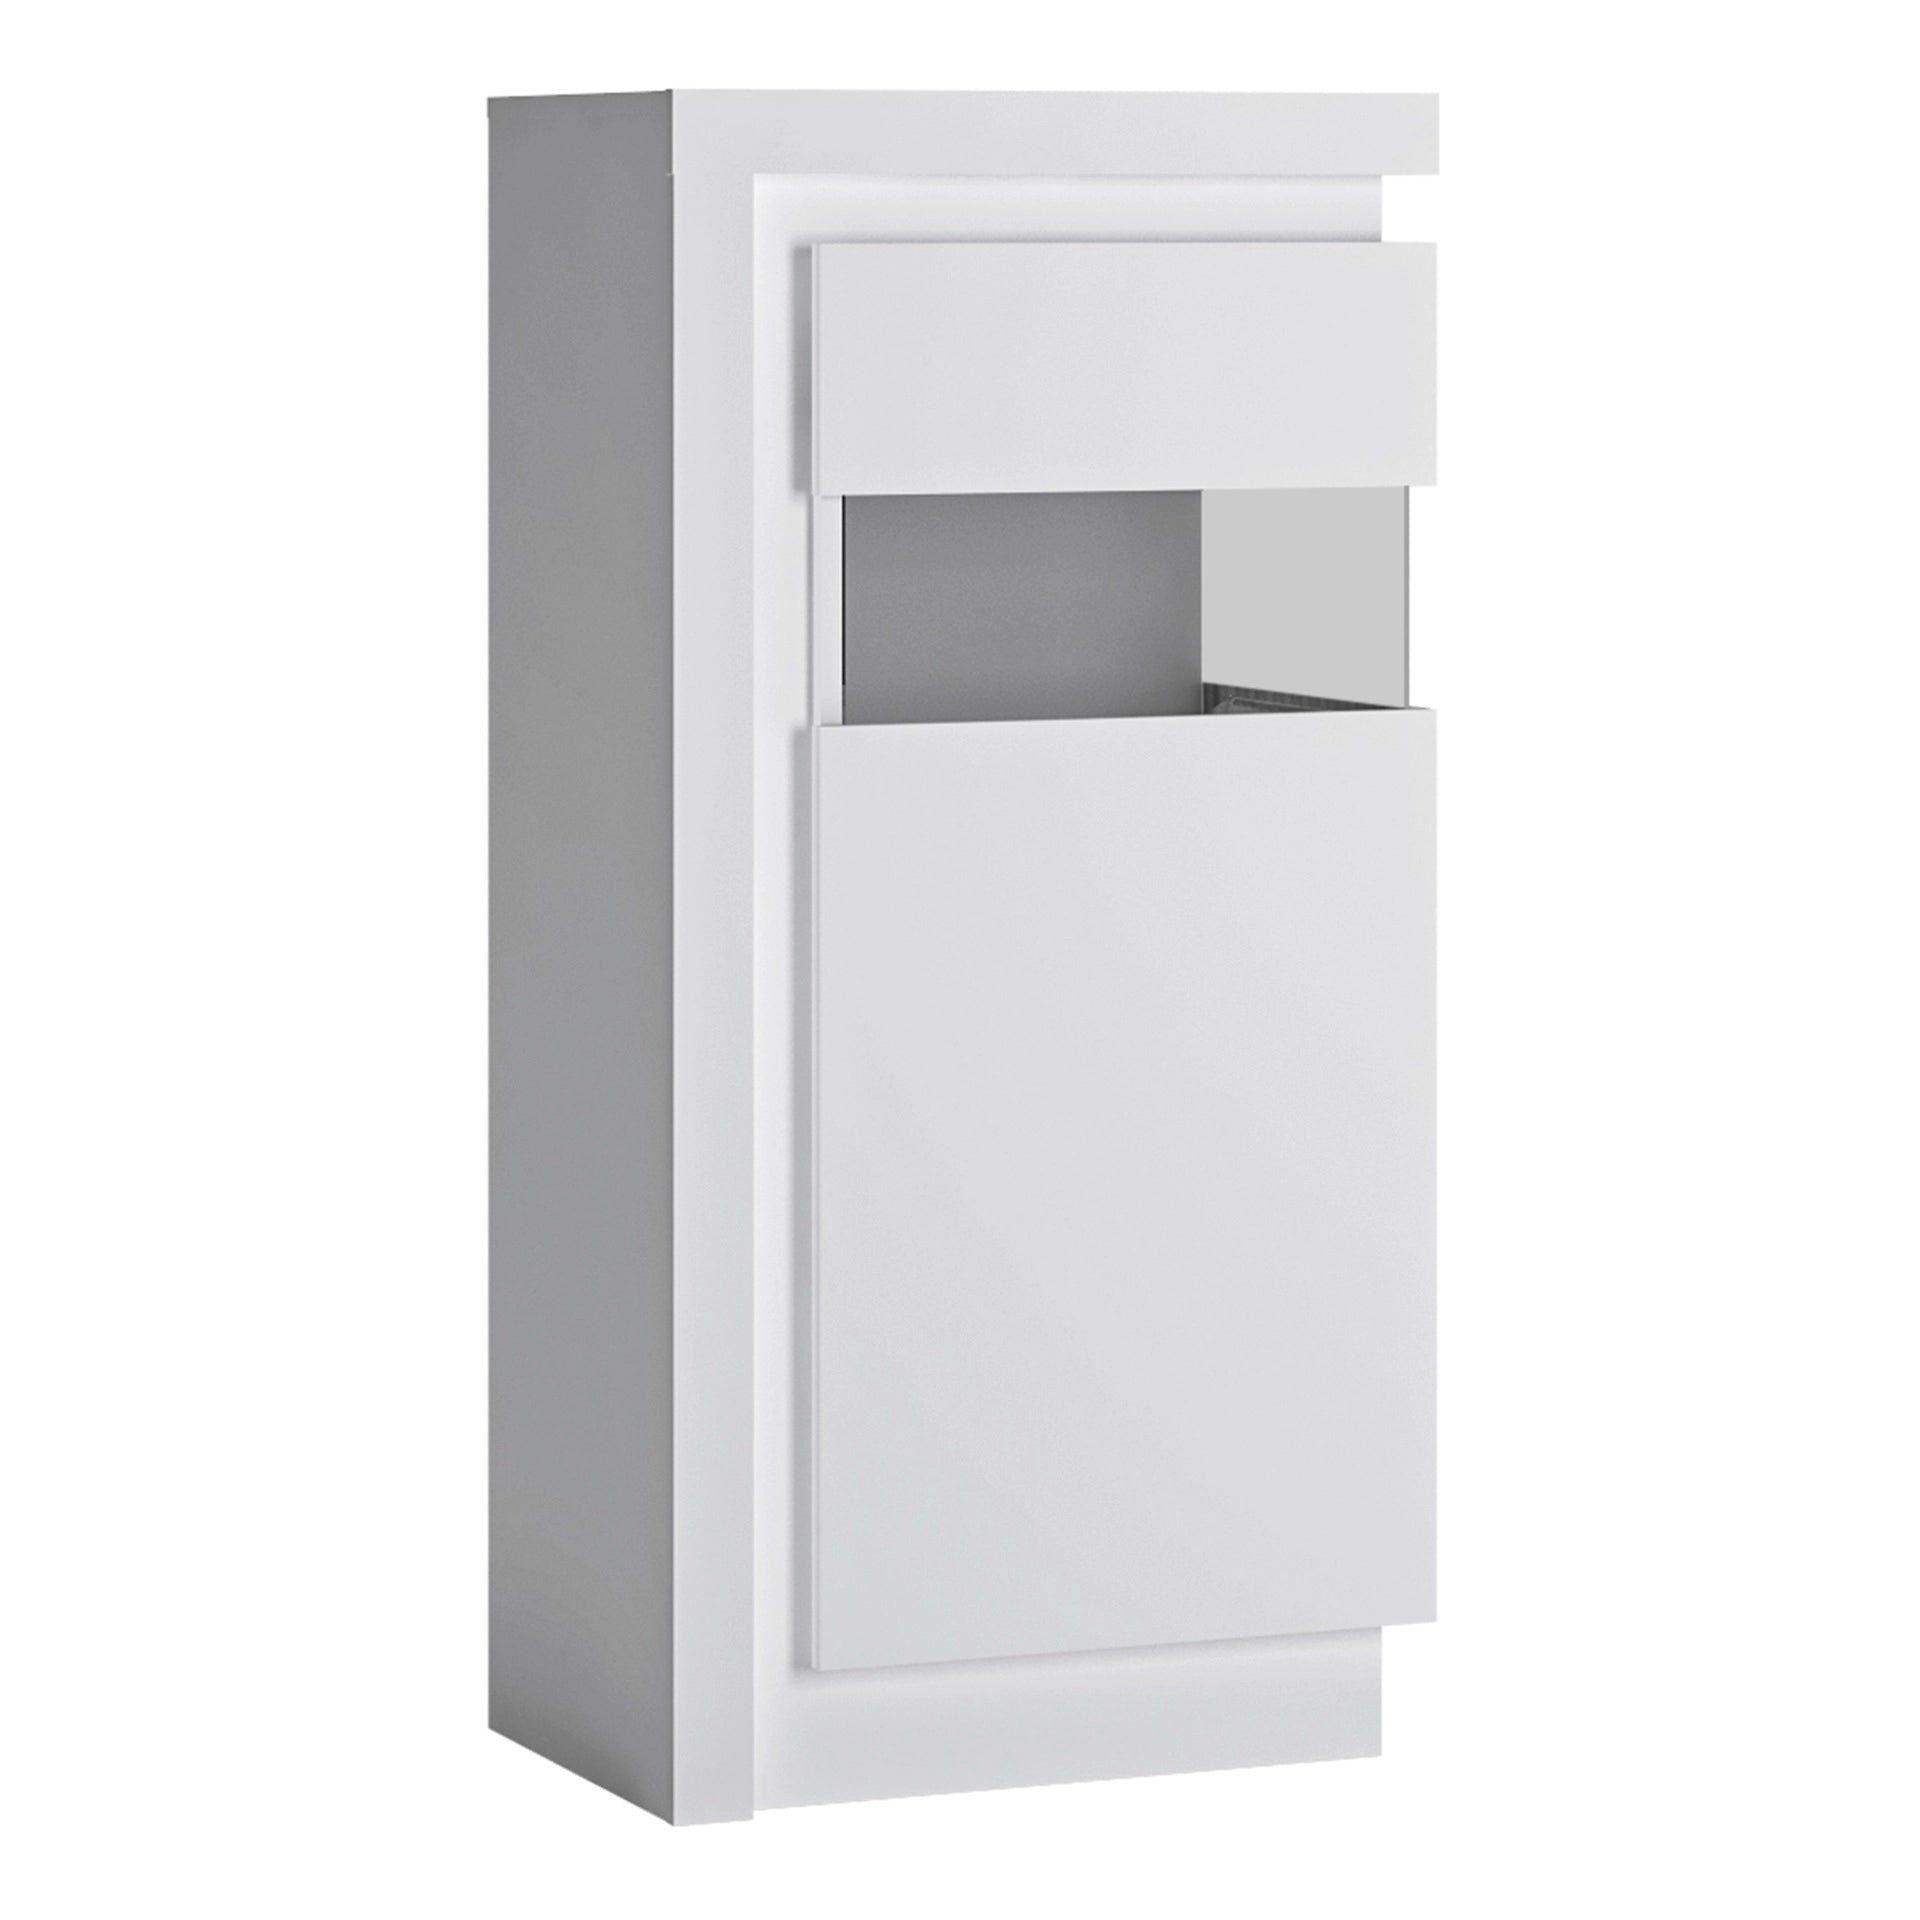 Furniture To Go Lyon Narrow Display Cabinet (RHD) 123.6cm High (Including Led Lighting) in White & High Gloss